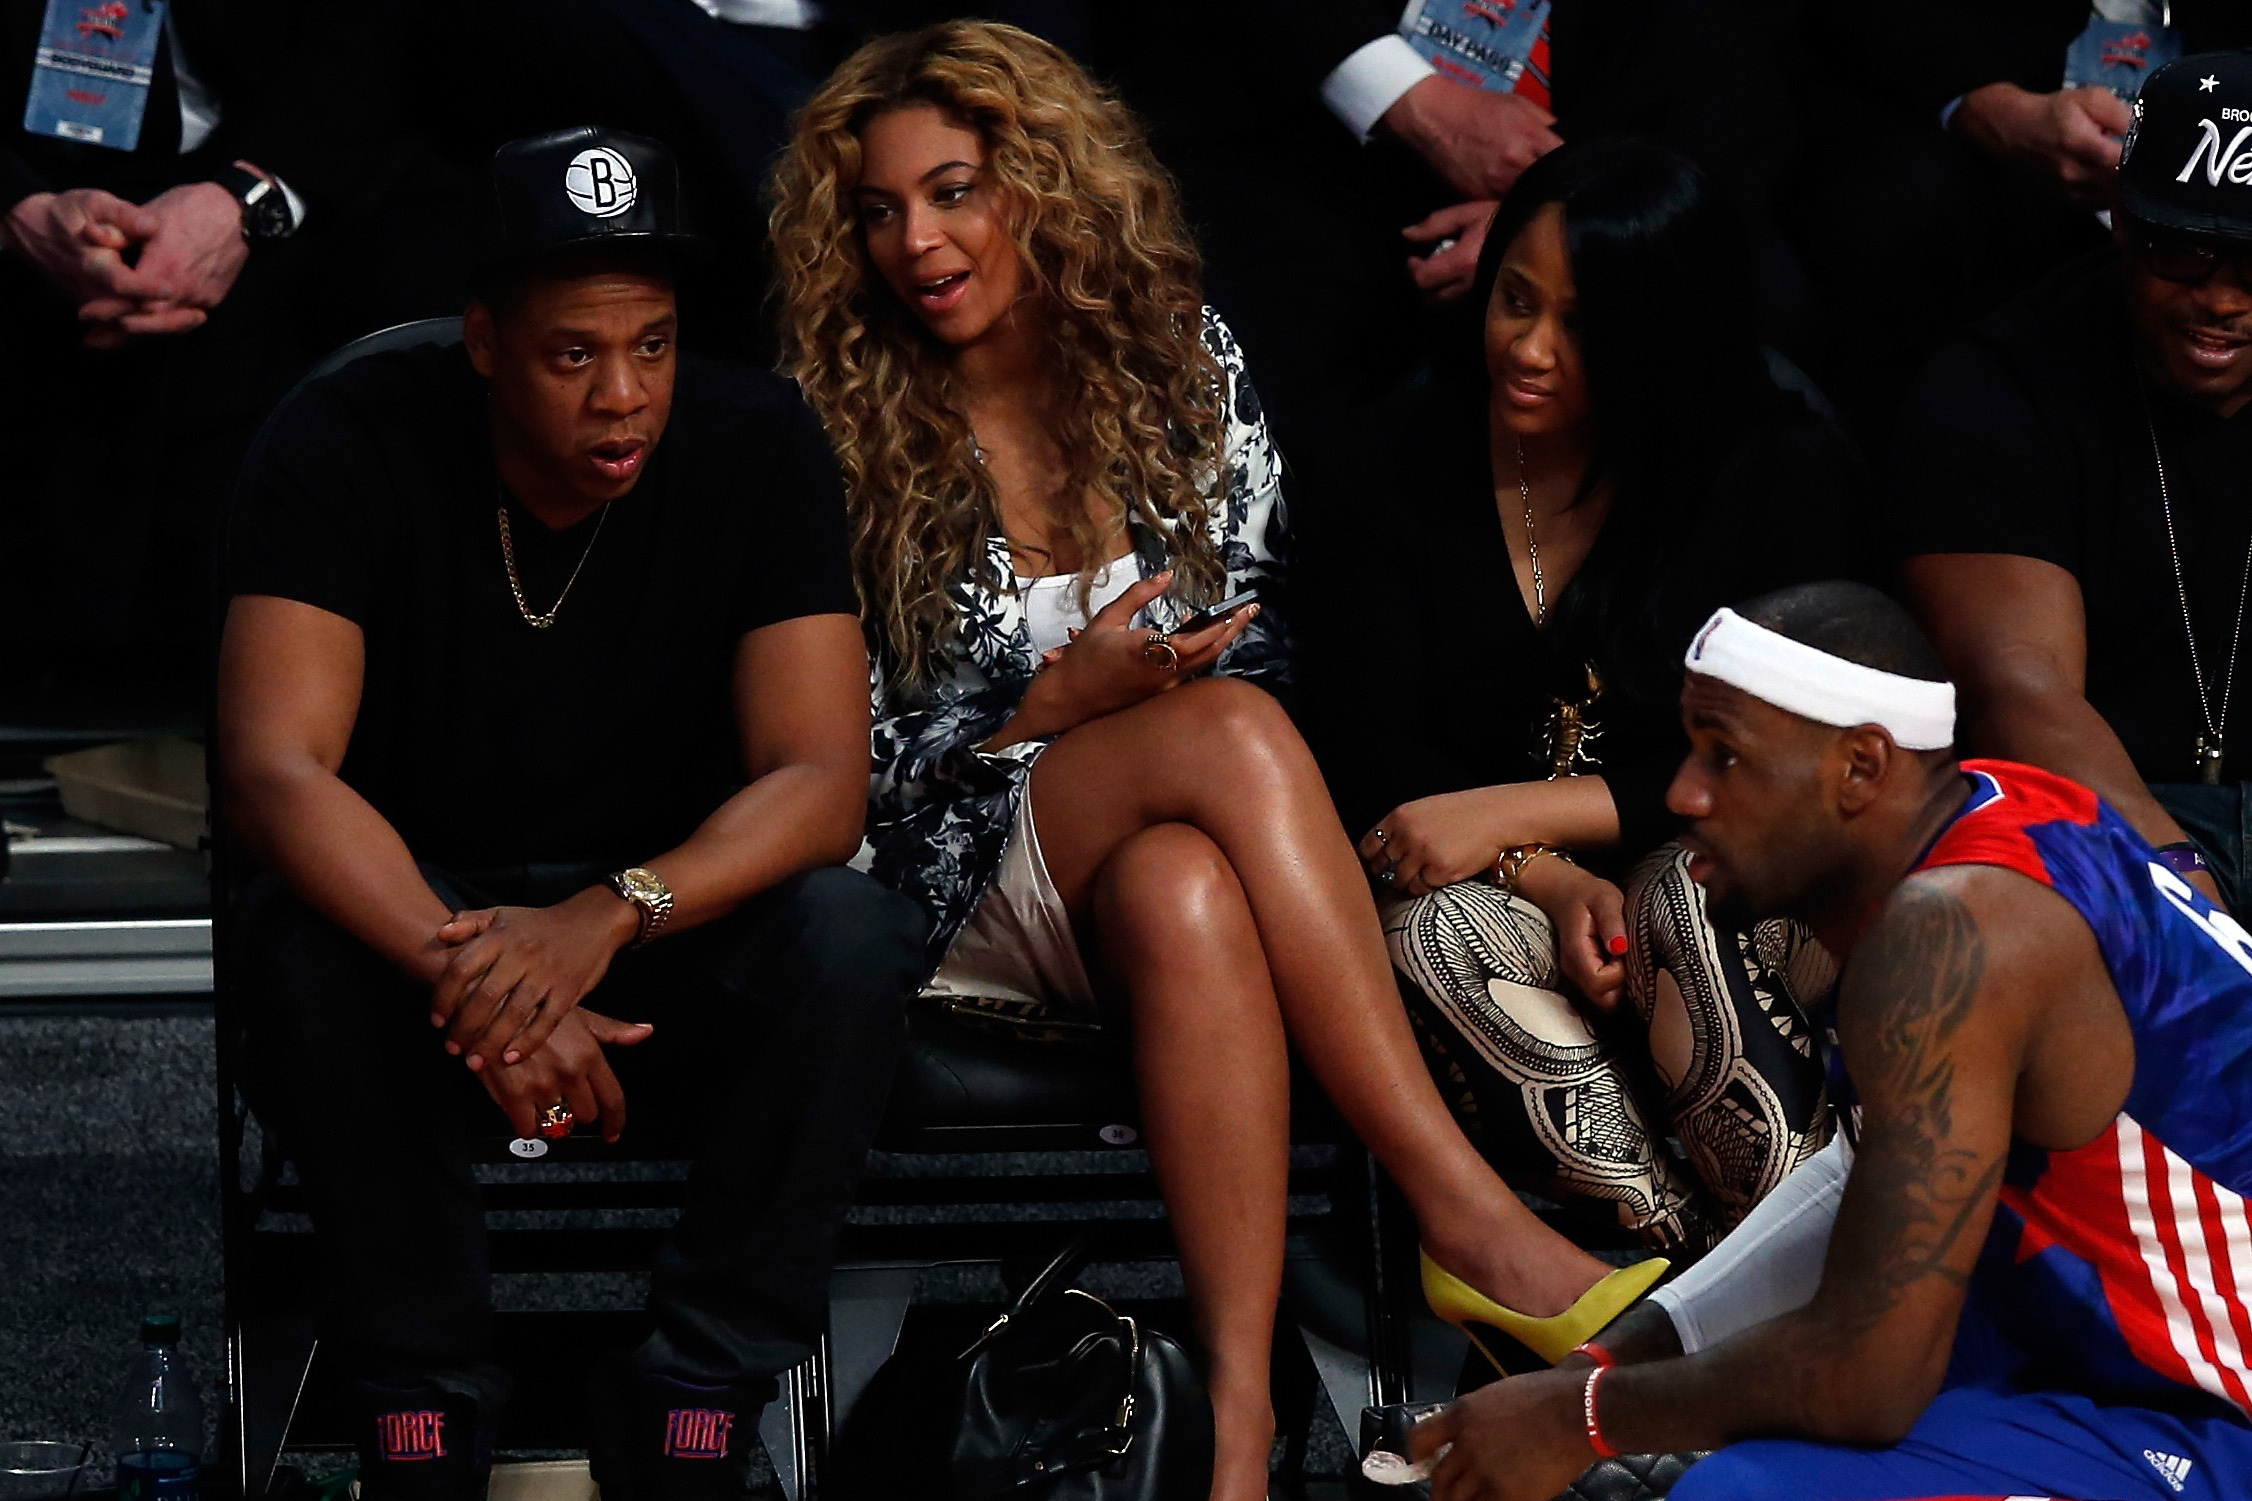 Jay-Z Hoping to Sign NHL Prospect to Roc Nation Sports, News